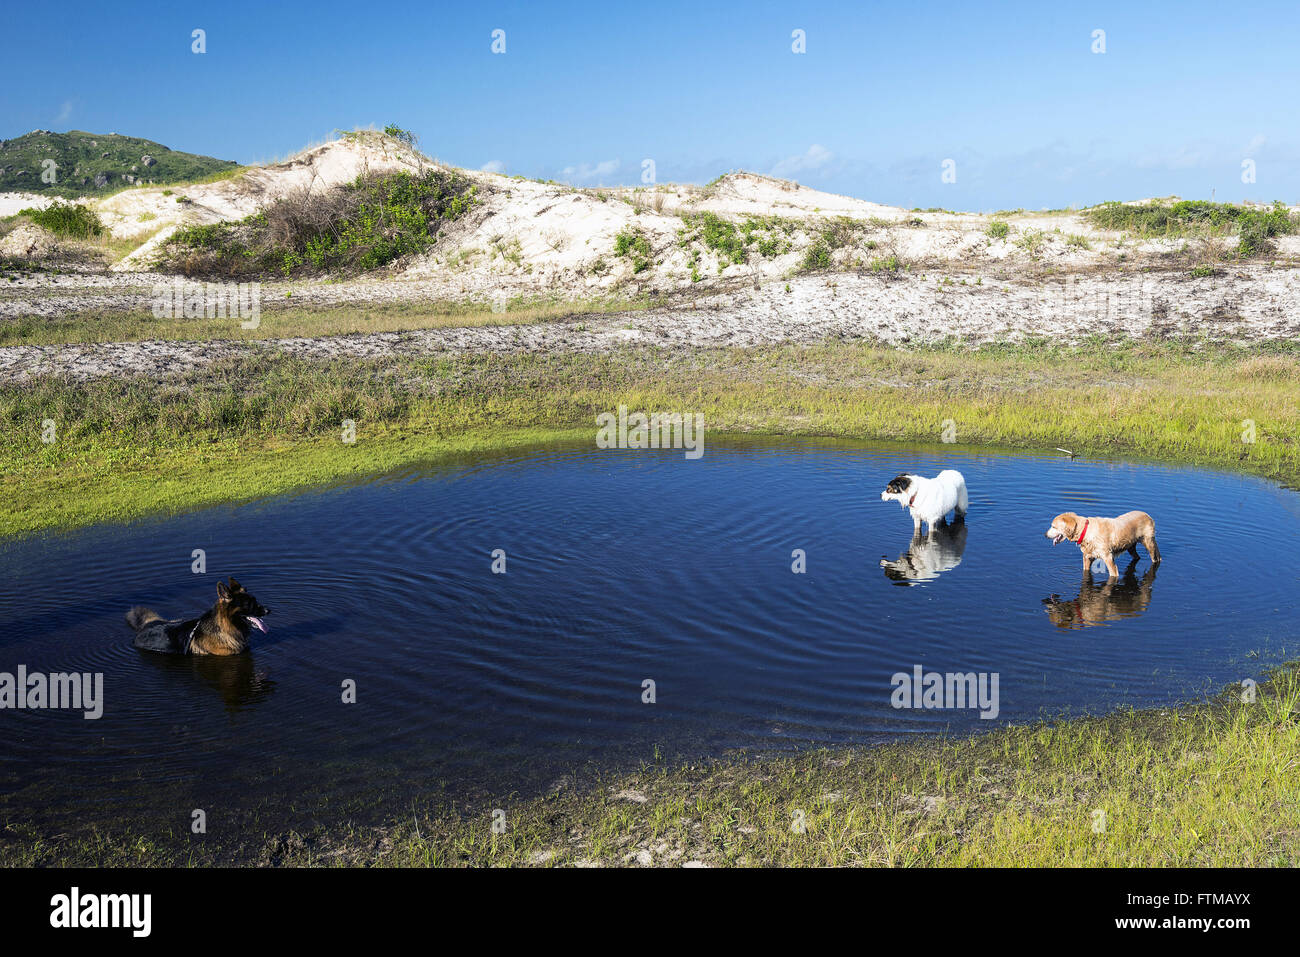 Clothes cooling down in the lake on track for Joaquina Beach in PMDLC Stock Photo